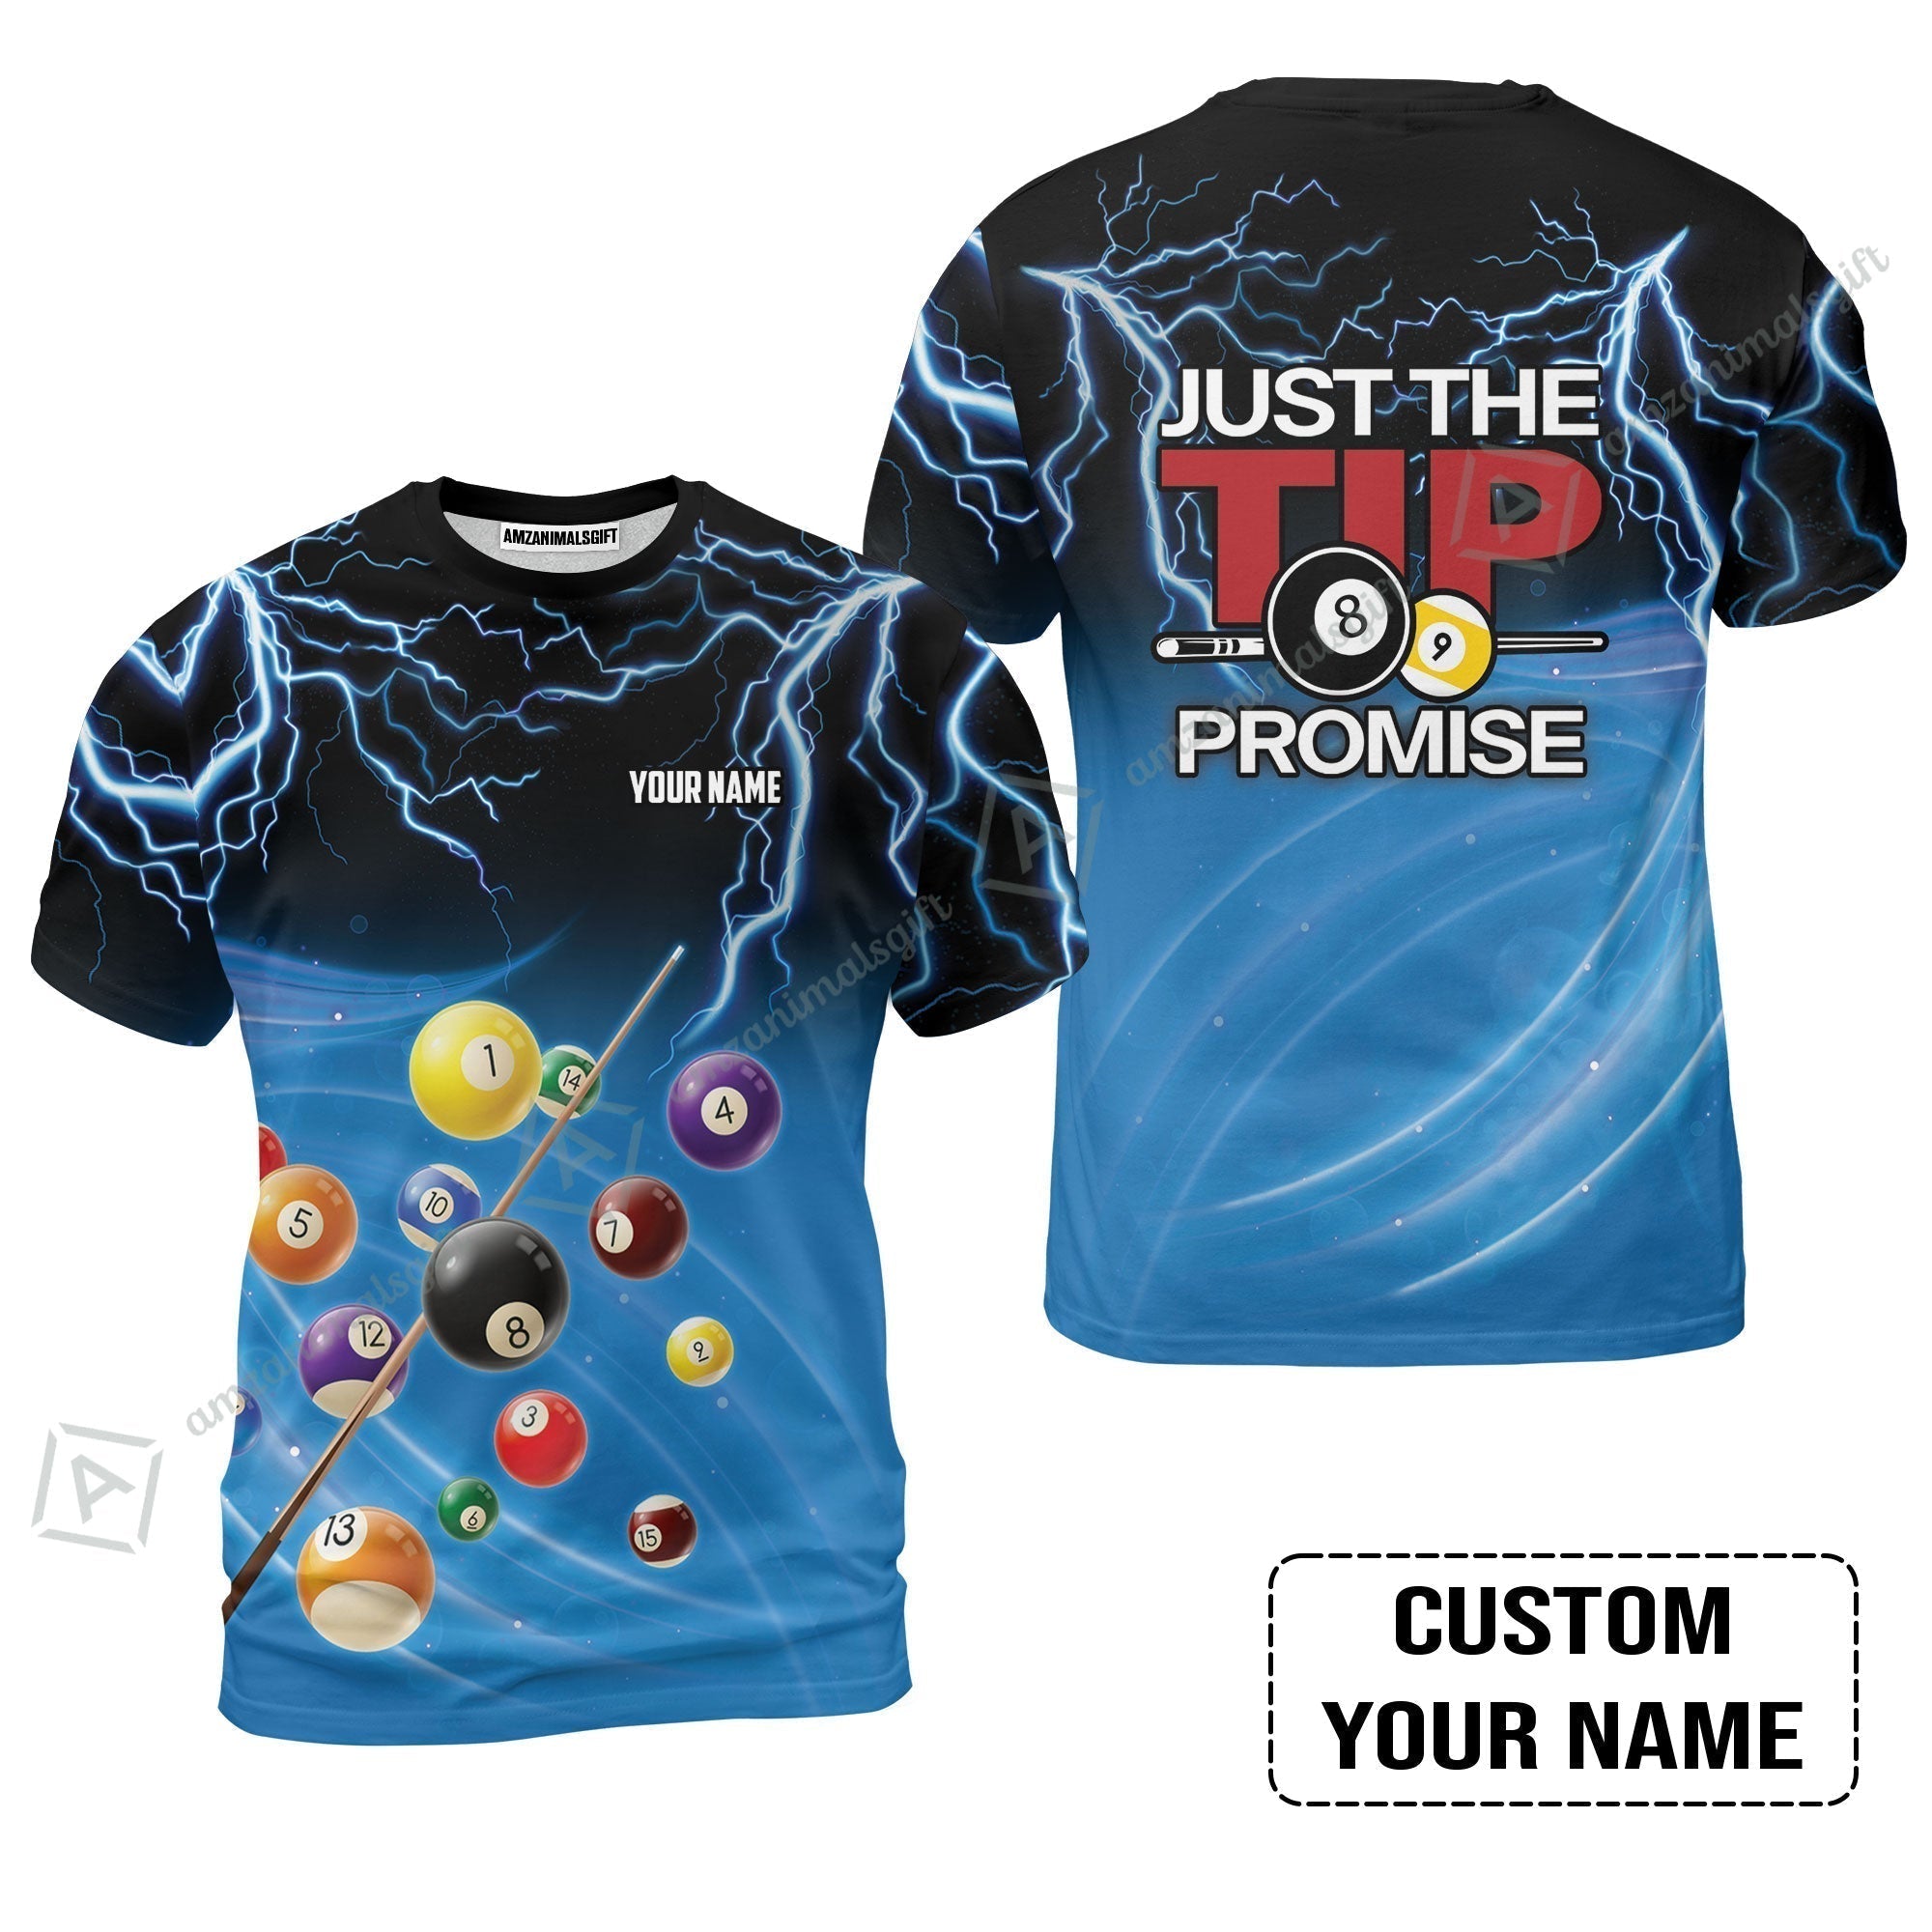 Custom Name T-Shirt, Personalized Thunder 8 Ball Pool Billiards T-Shirt, Gift For Billiard Lovers, Just The Tip I Promise